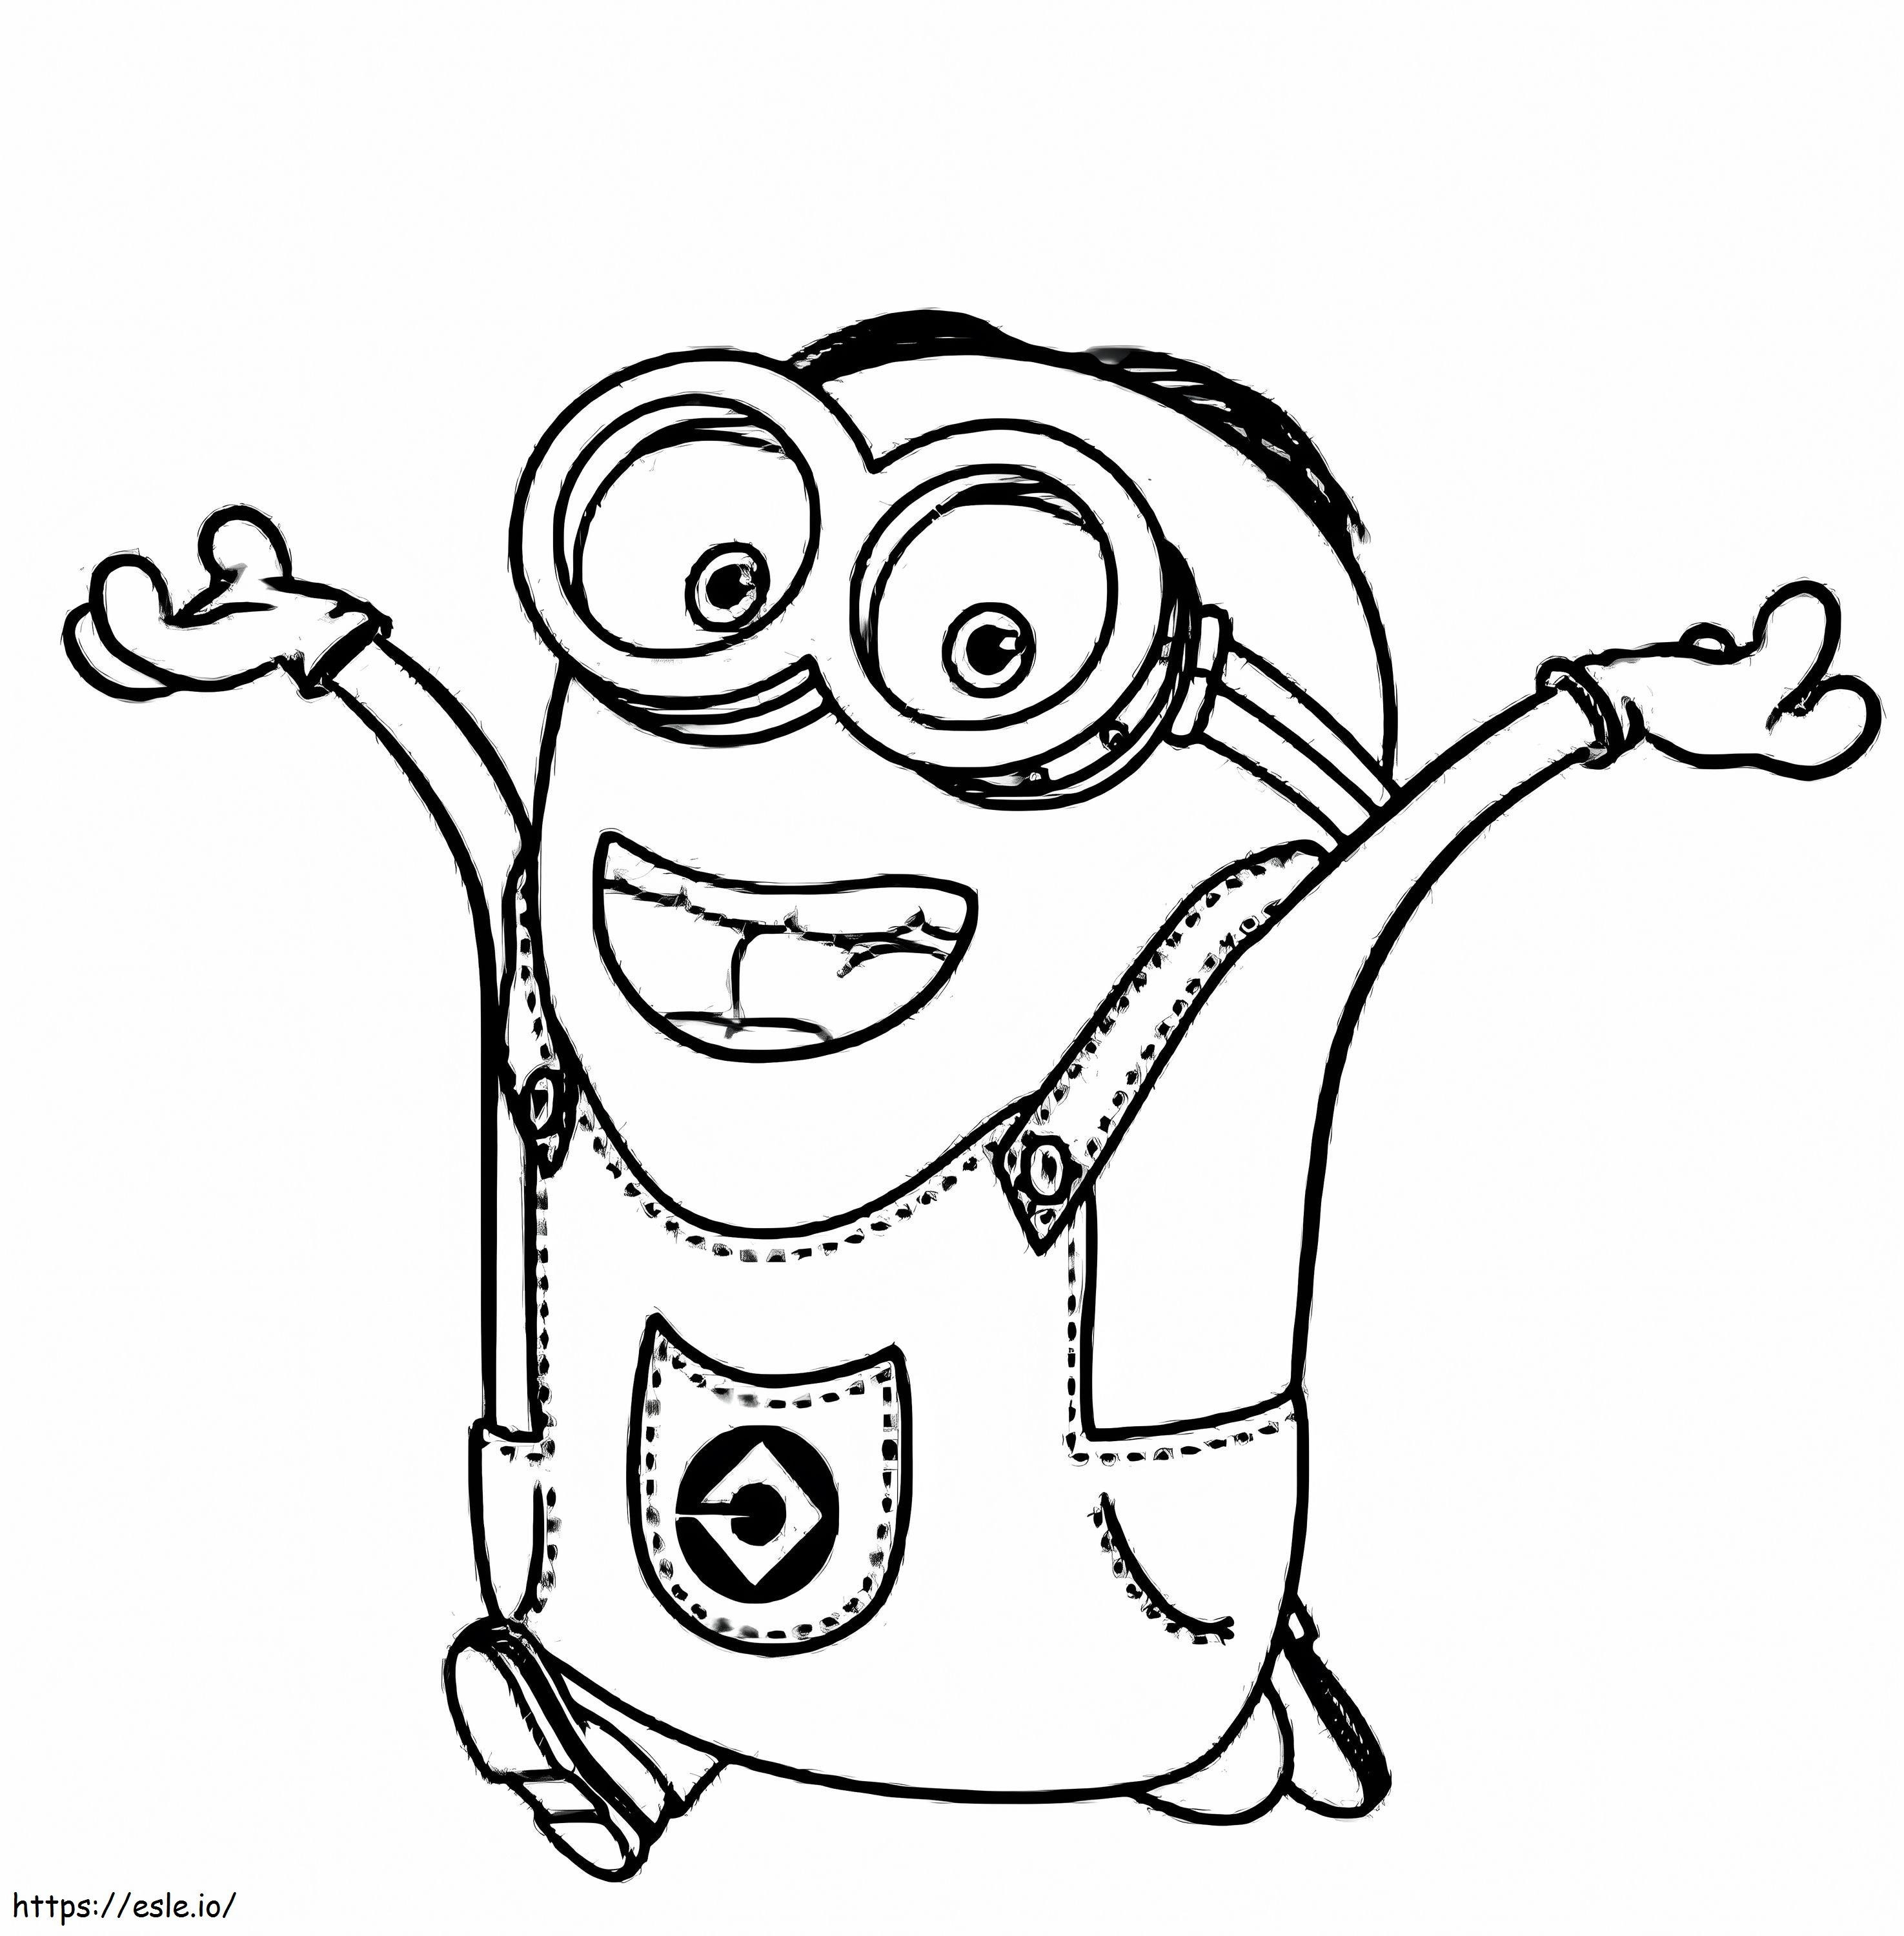 1531713237 Minion Stuart Running A4 coloring page